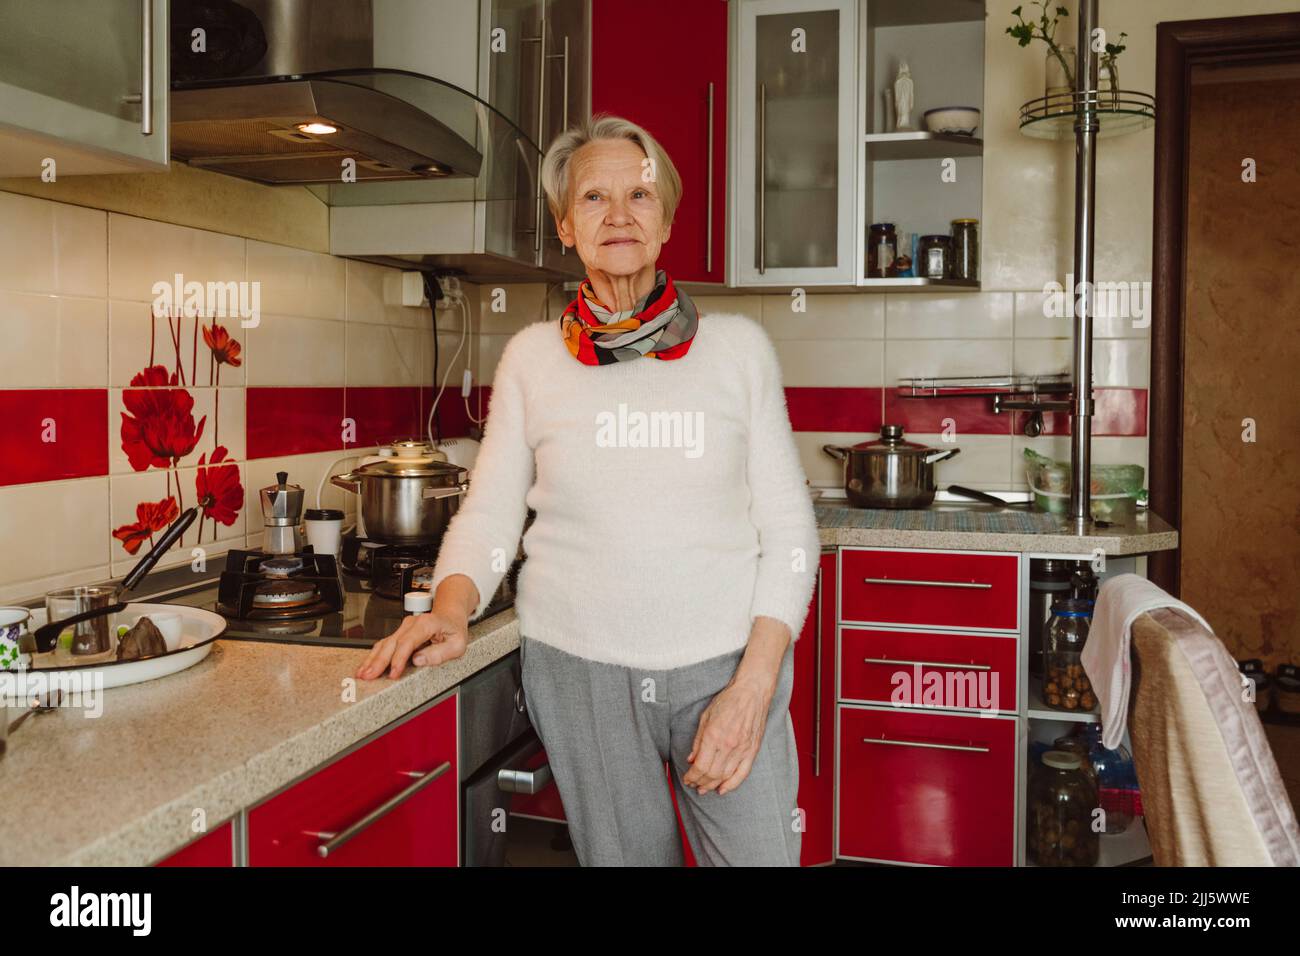 Smiling senior woman standing by kitchen counter Stock Photo